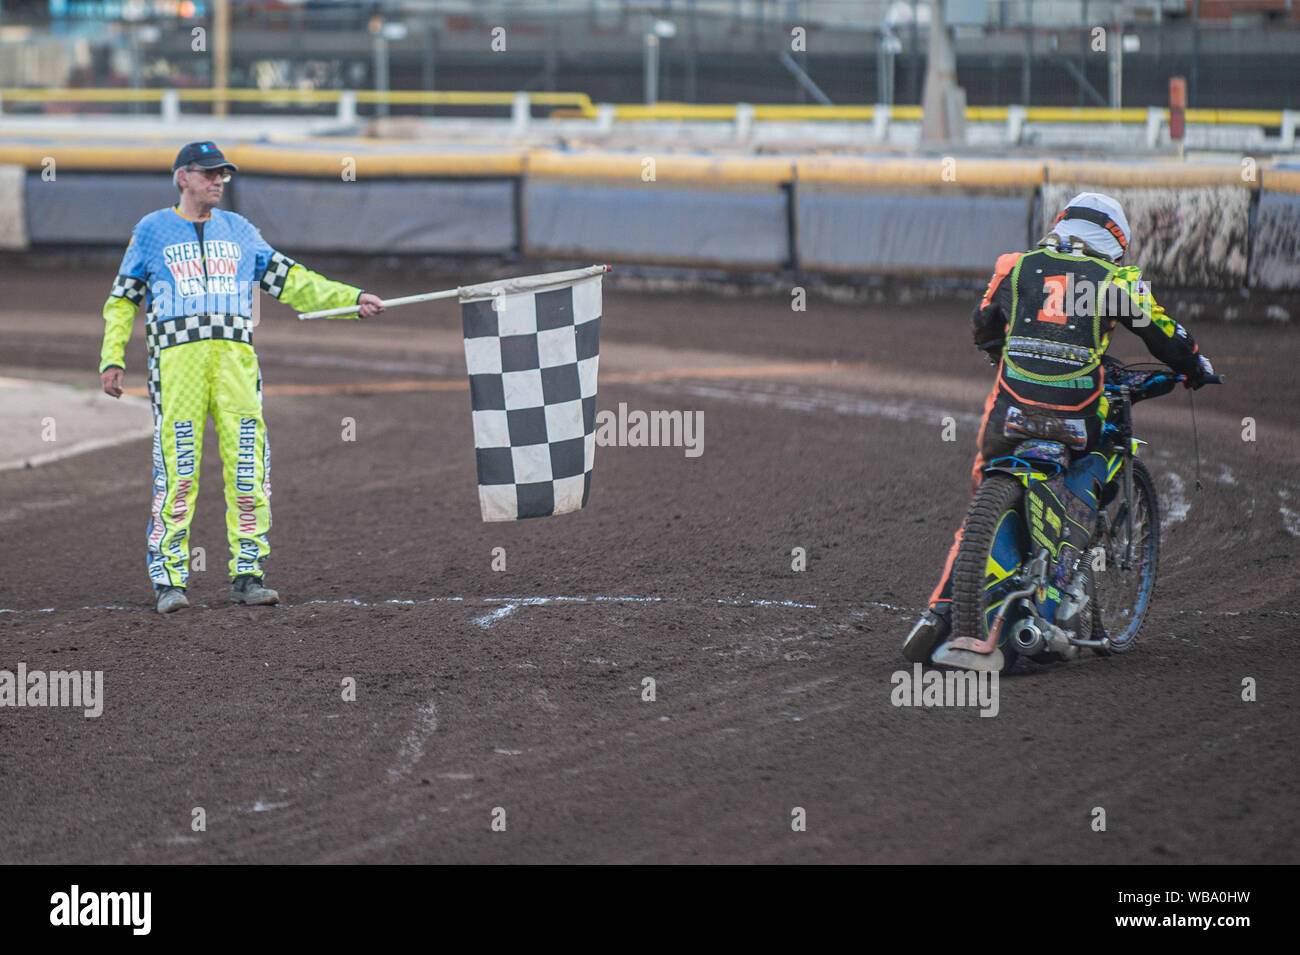 Sheffield, UK. 25th Aug, 2019. SHEFFIELD, ENGLAND AUG 25TH Ryan Kinsley pushes home to gain third place after falling on the last turn. He got up and pushed his bike to the finish during the National League Best pairs Championship at Owlerton Stadium, Sheffield on Sunday 25th August 2019 (Credit: Ian Charles | MI News) Credit: MI News & Sport /Alamy Live News Stock Photo